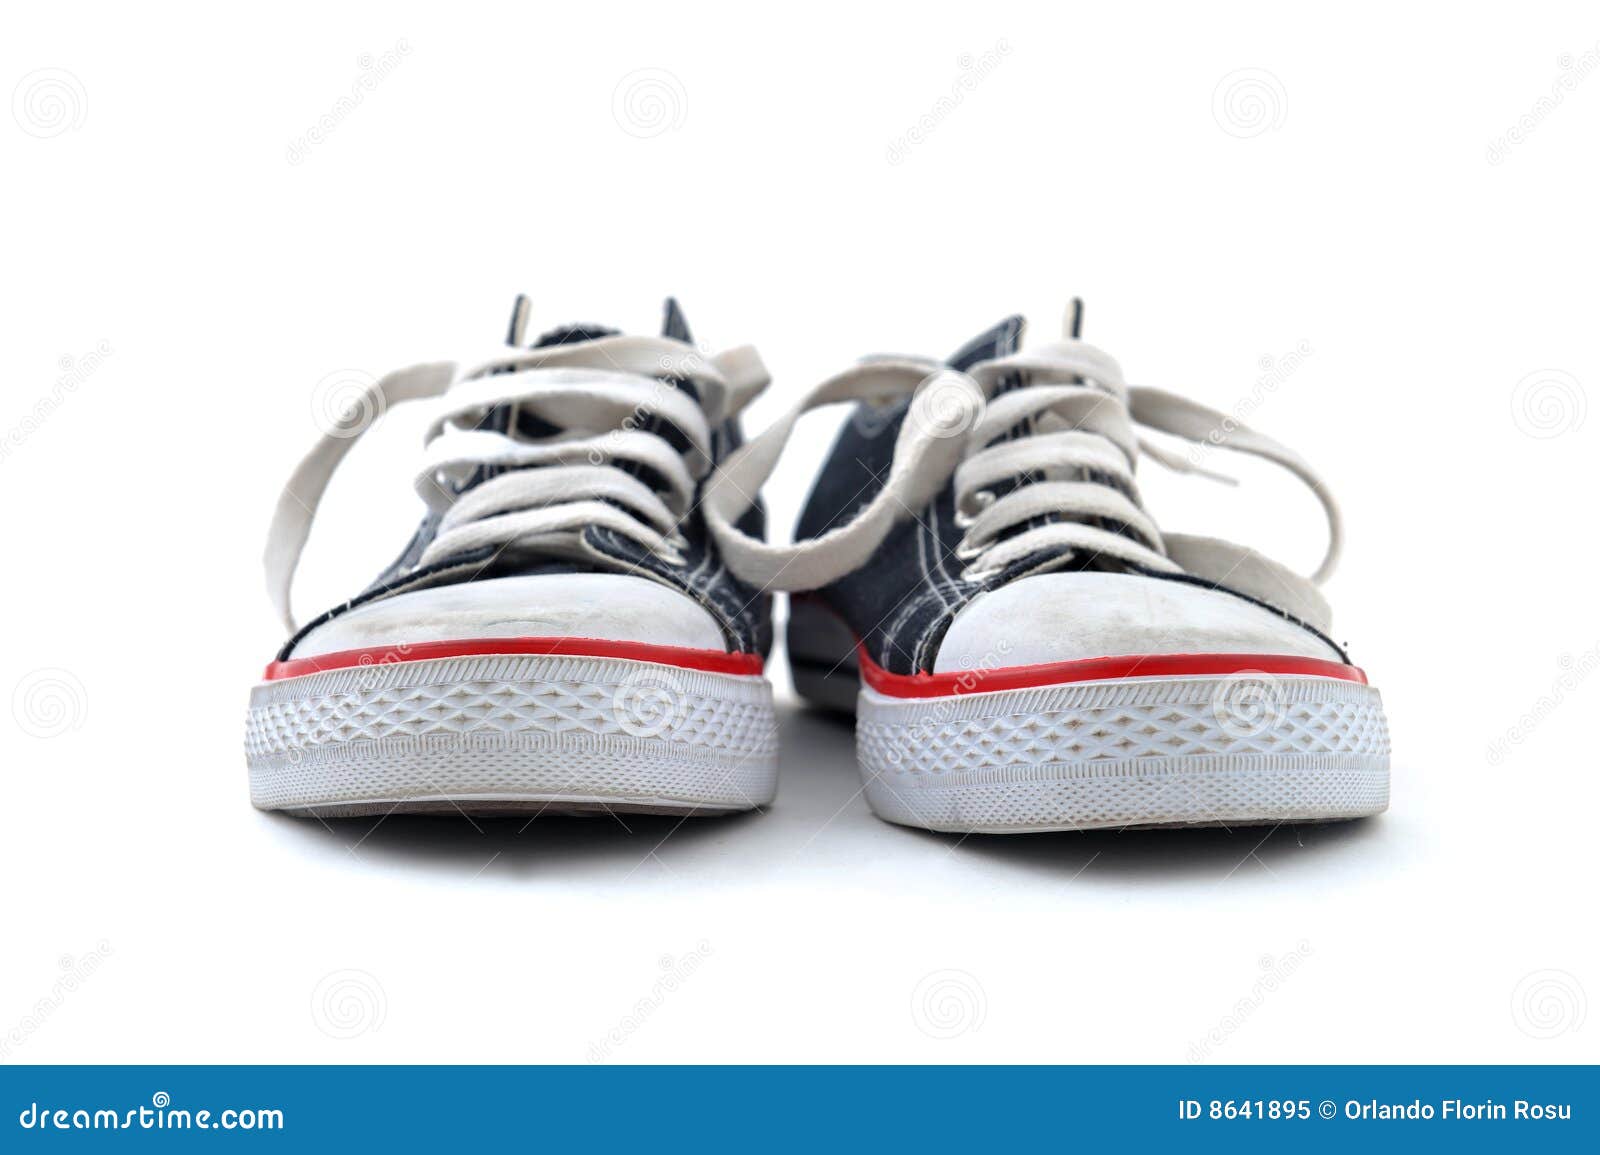 Sport shoes stock image. Image of basketball, equipment - 8641895